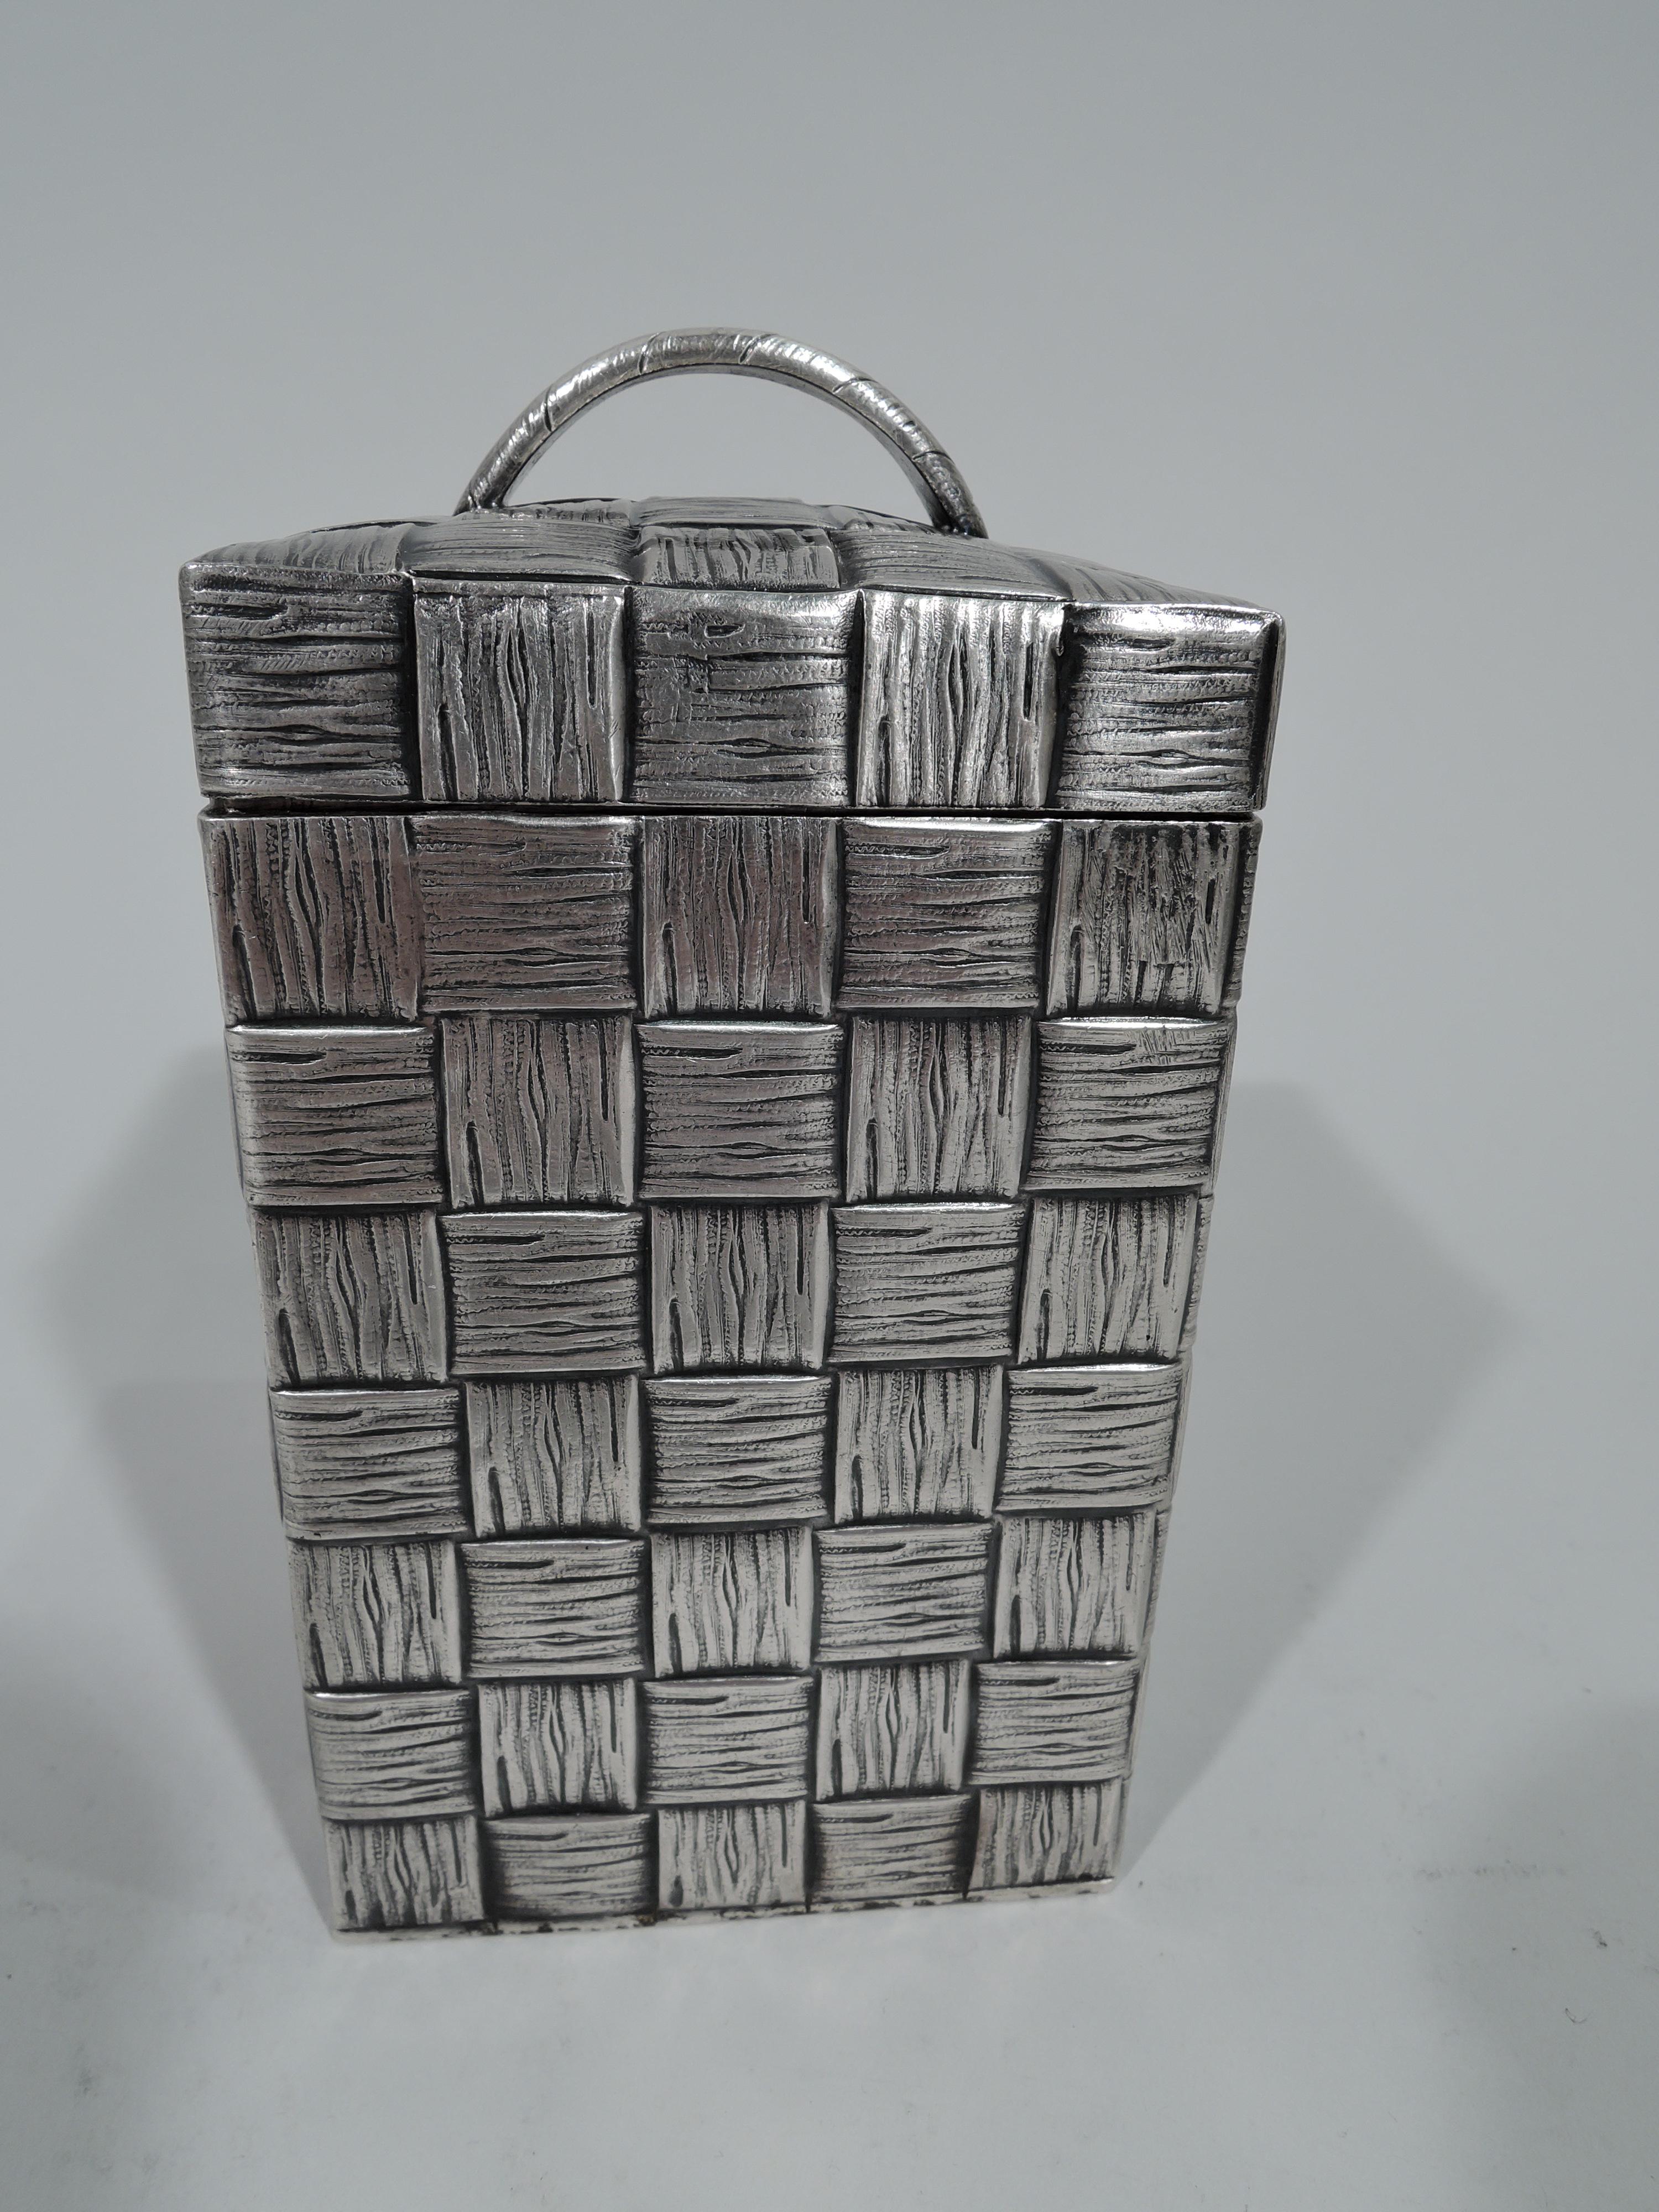 German 800 silver tea caddy, circa 1900. Rectangular with gently curved cover and loop handle. Realistic basket weave is perfect for a rarefied organic blend. Cover fits snugly to protect the precious leaves. Fully marked. Weight: 8 troy ounces.